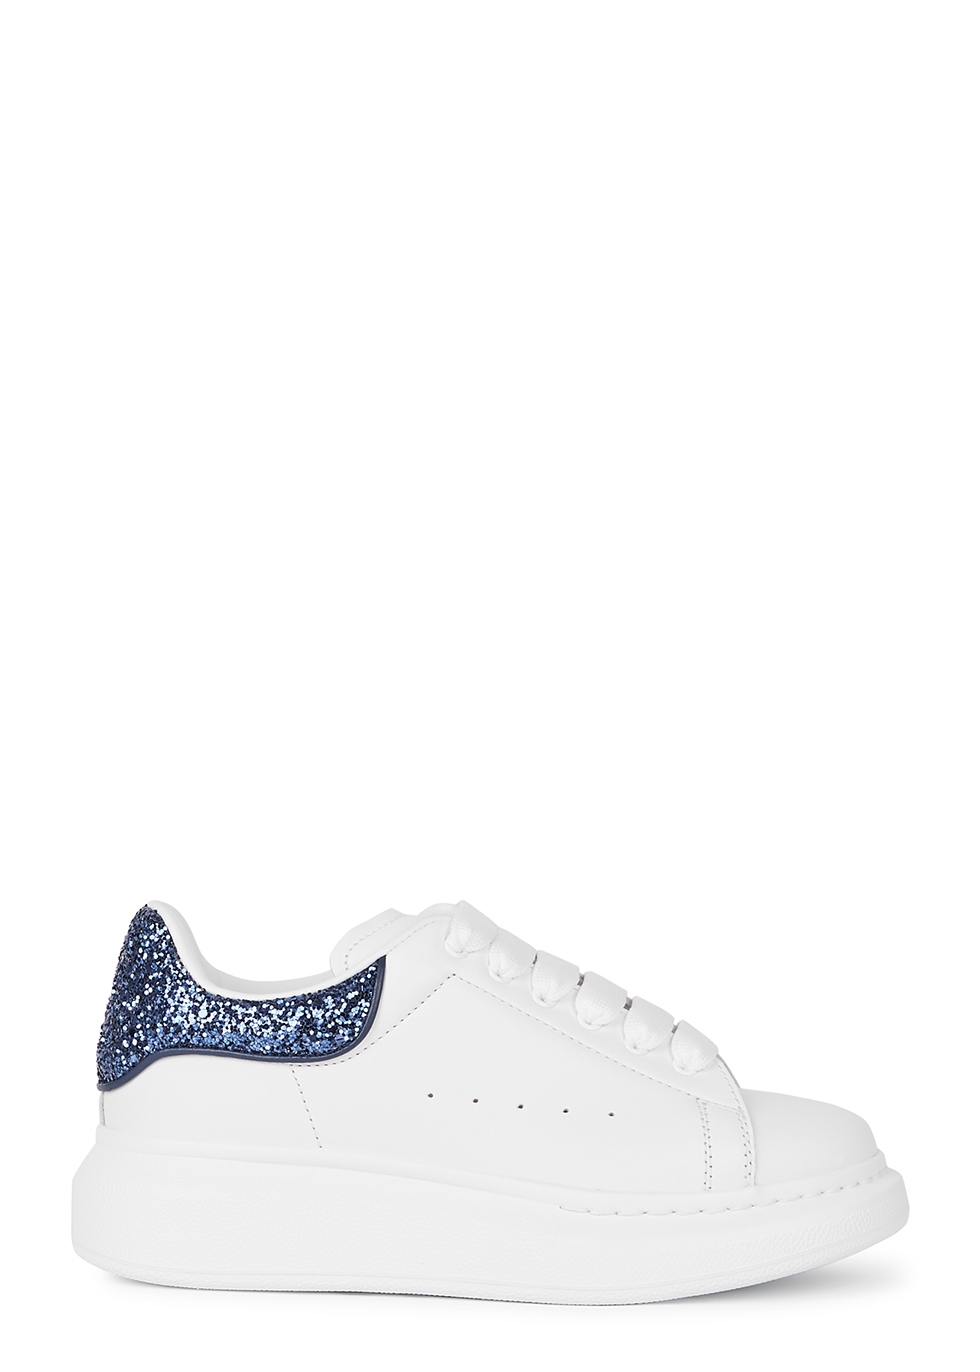 KIDS Oversized white leather sneakers